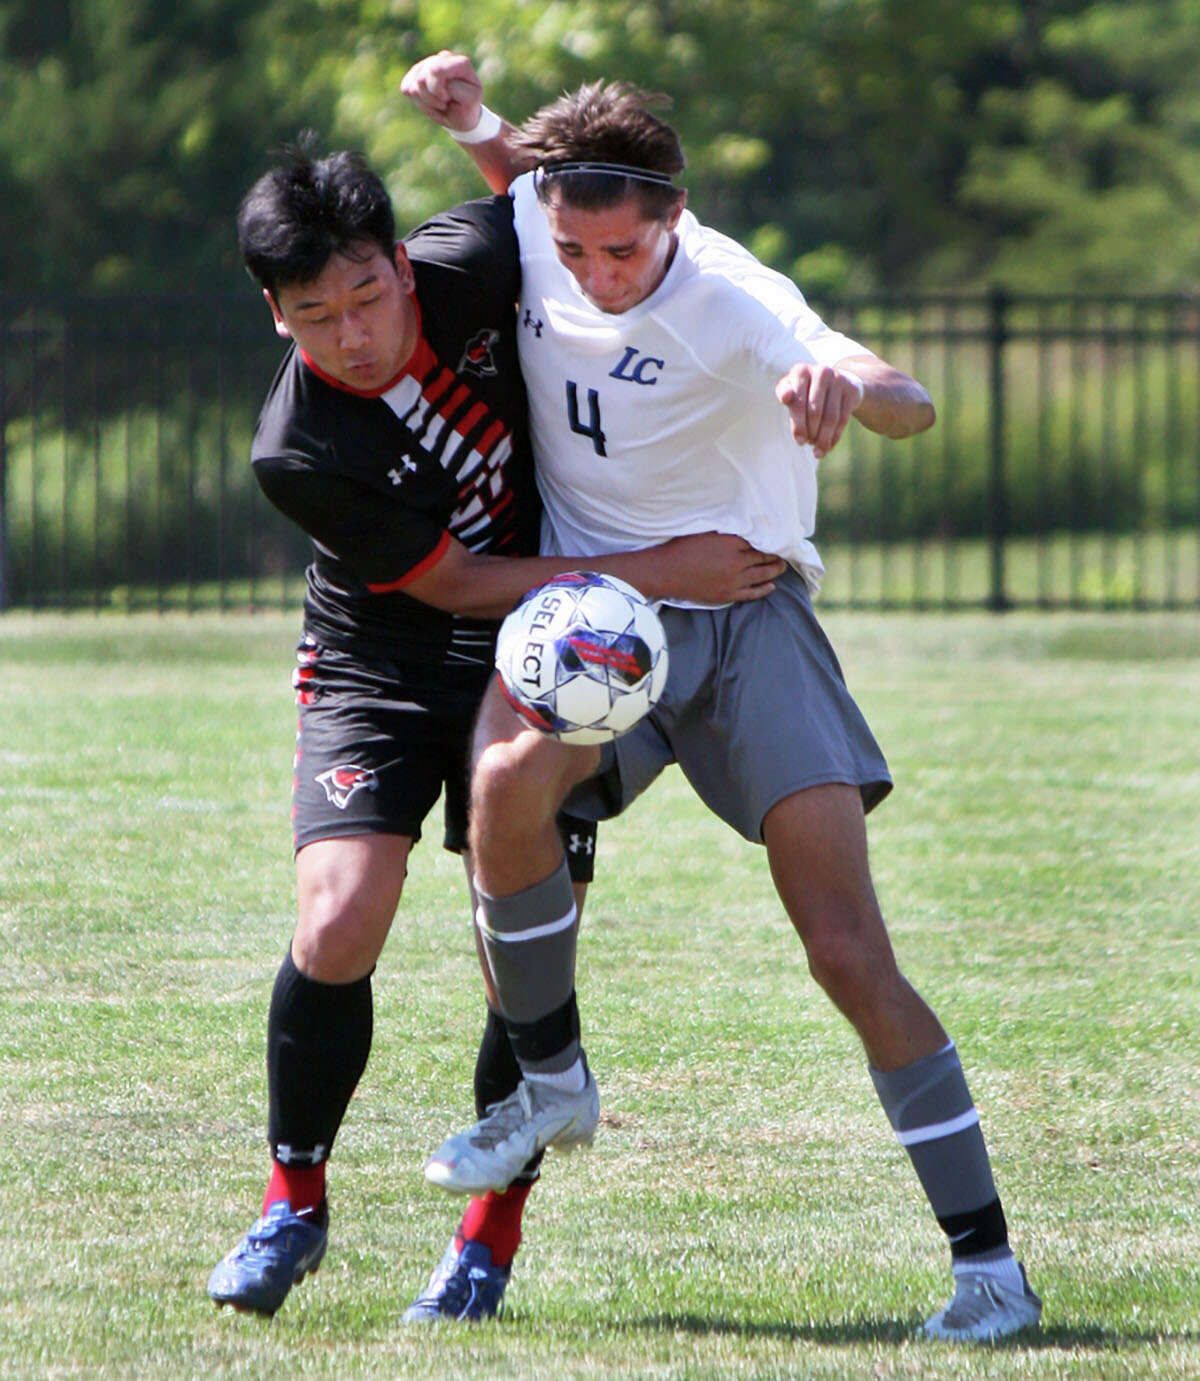 LCCC's Gino Buffa (4) a sophomore from Howell Central High School, battles for the ball with a Southeastern College player Saturday at Tim Rooney Field.